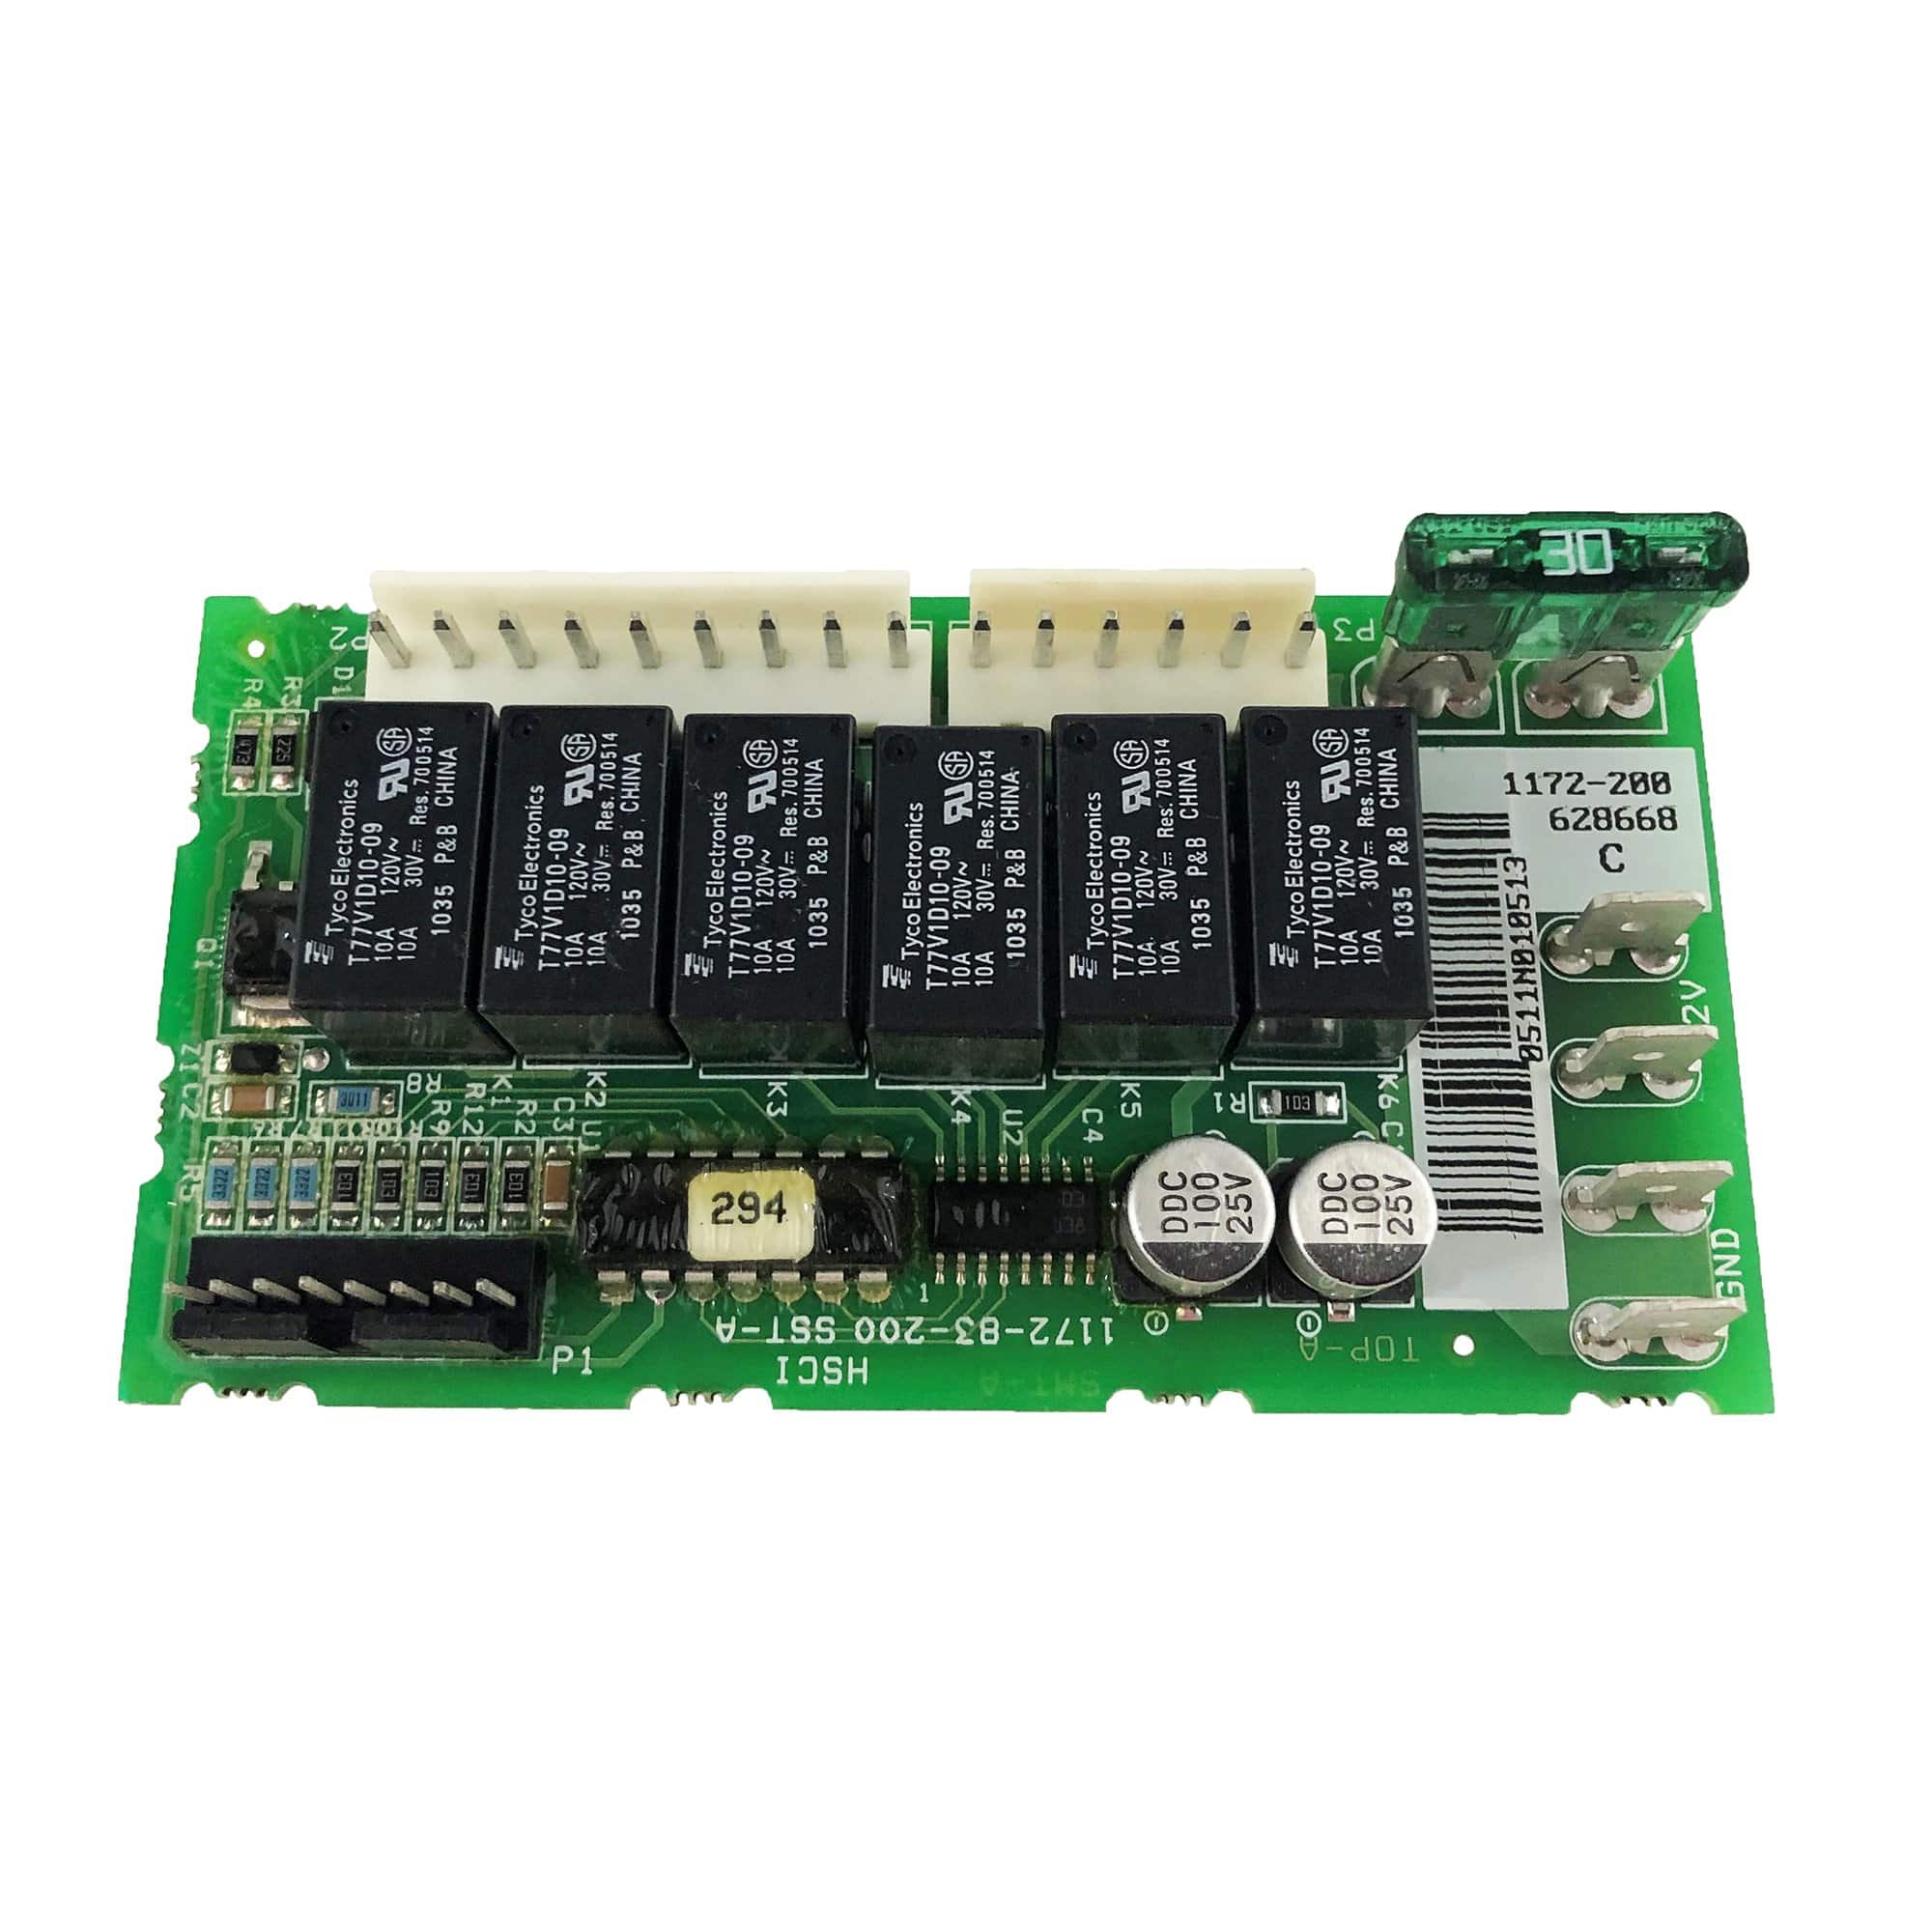 Norcold 628668 Defrost Board